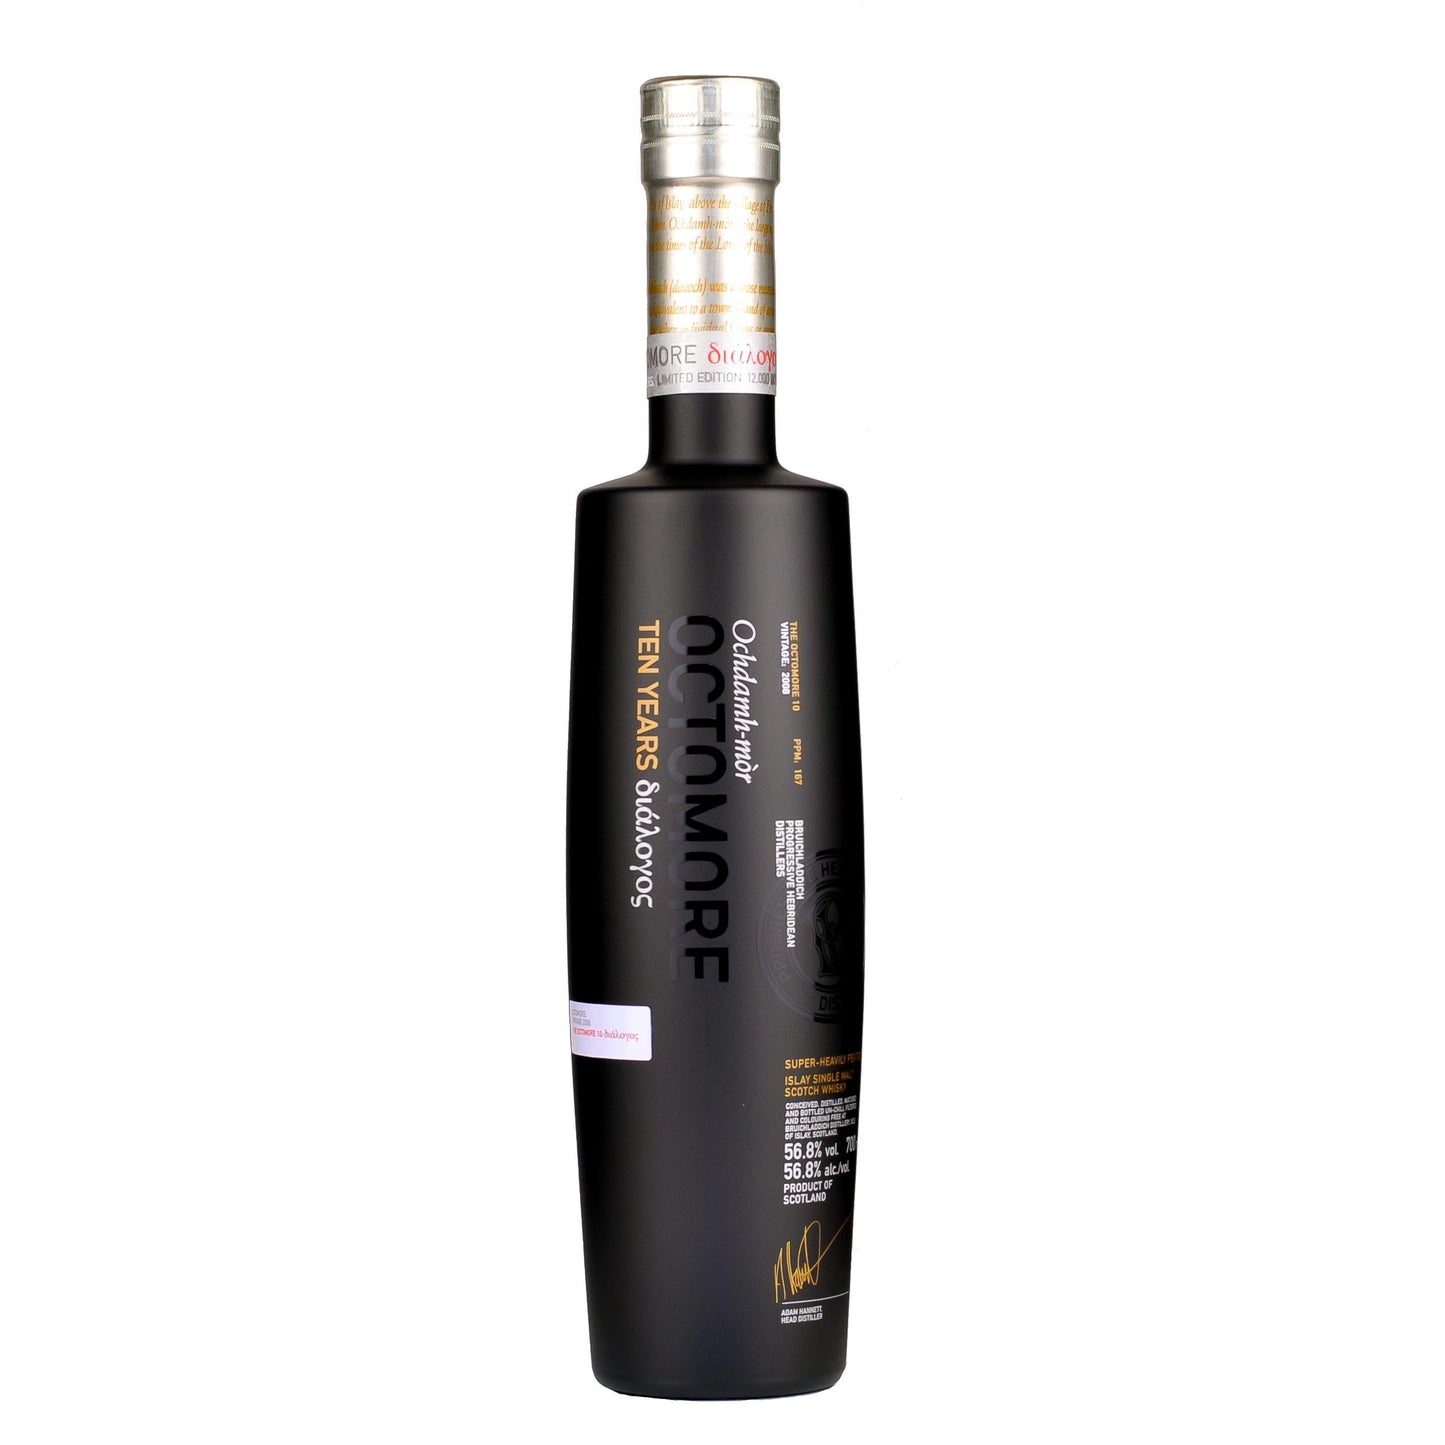 Octomore 10 Years Old 3rd Edition <br>5 cl - Whisky Grail